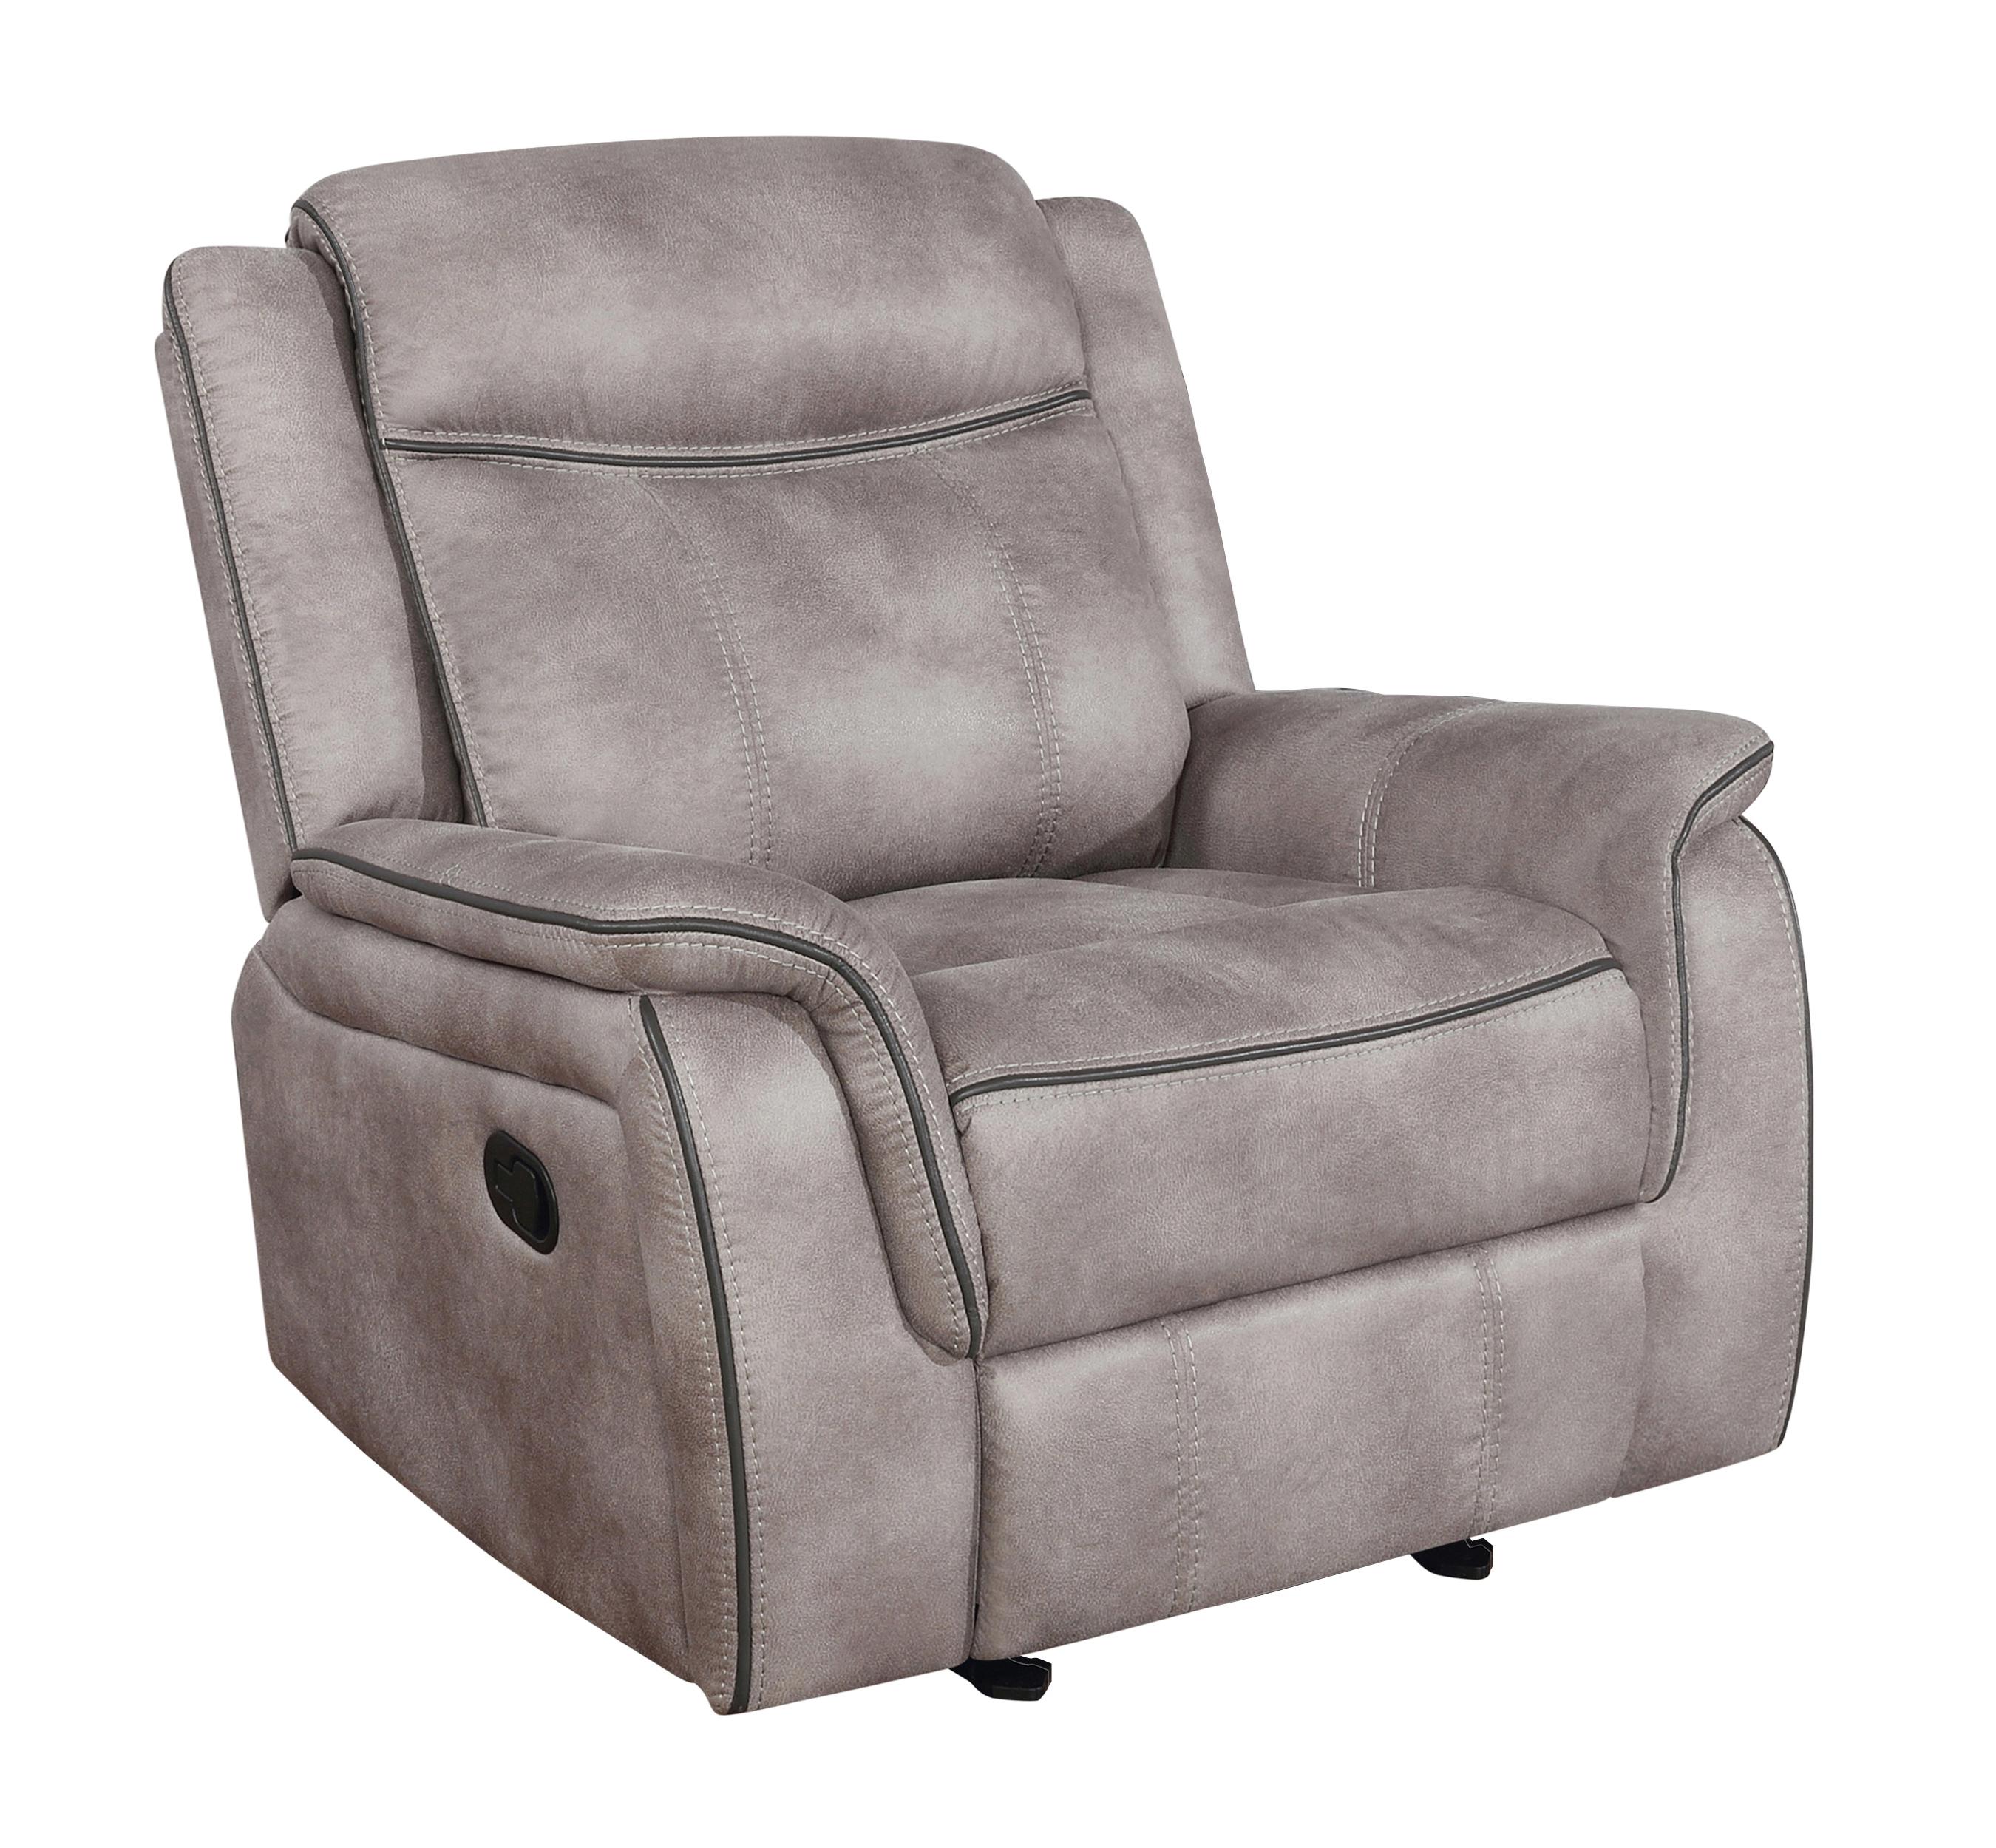 Coaster 603503 Lawrence Glider recliner